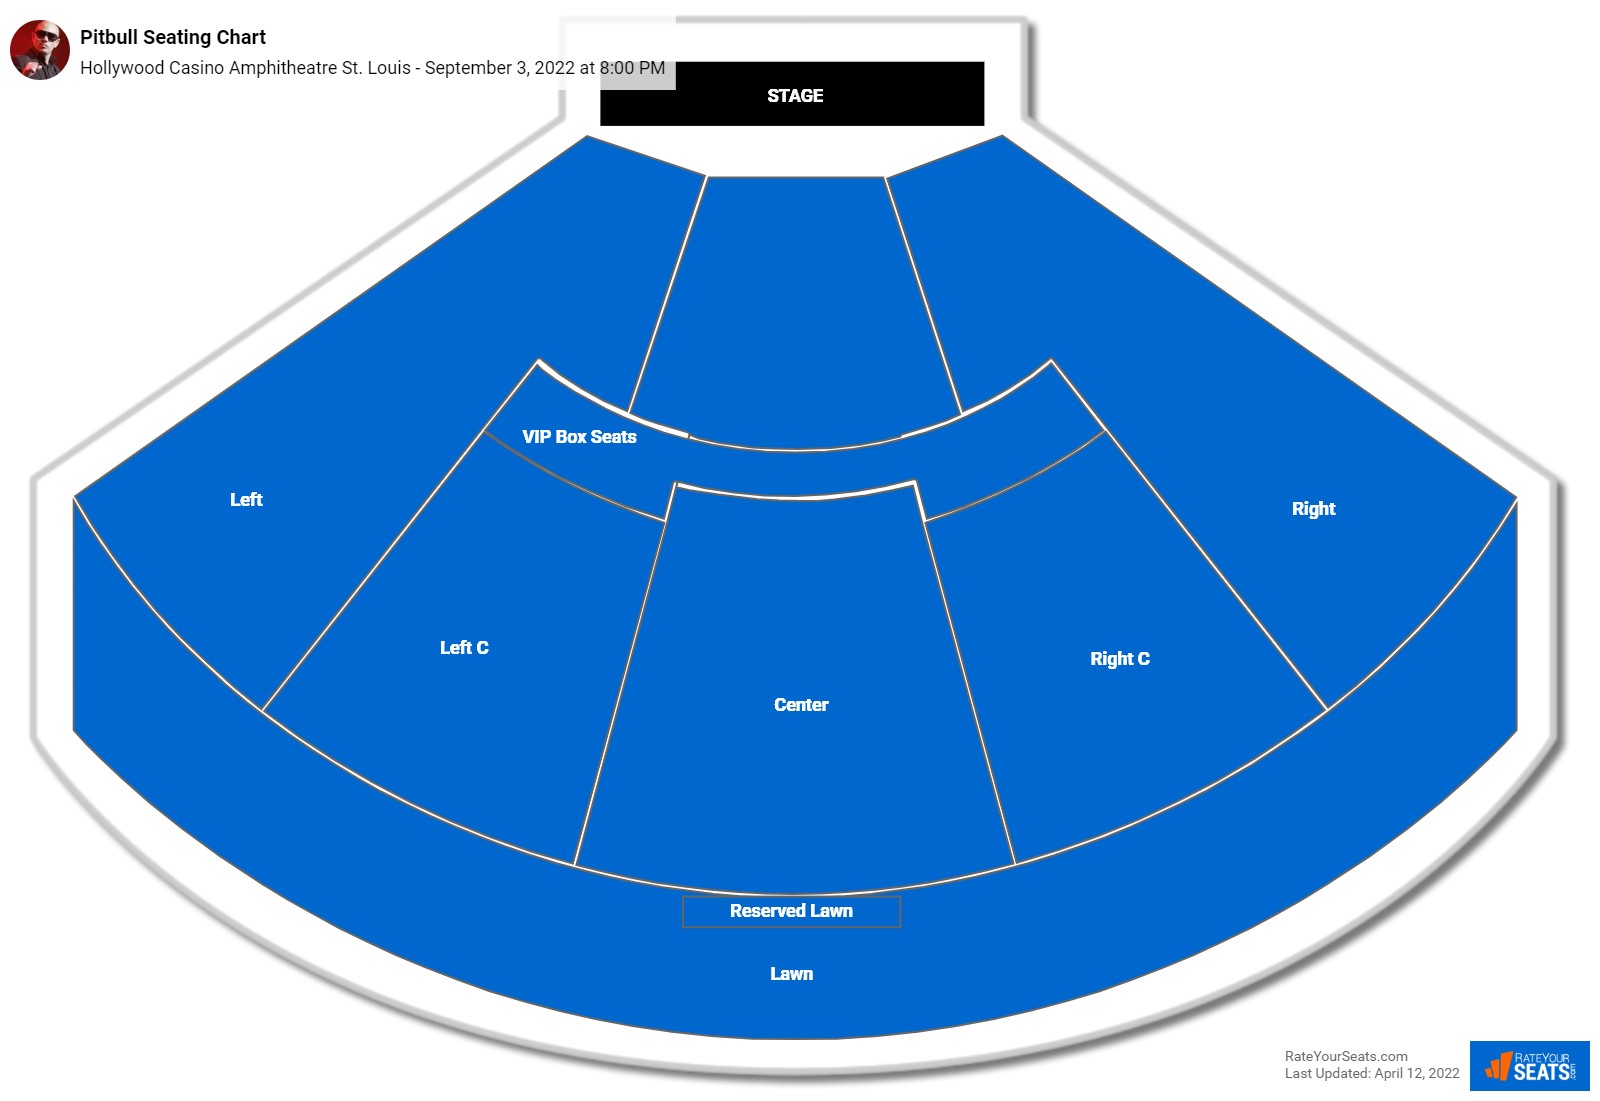 hollywood casino amphitheatre st louis seating chart